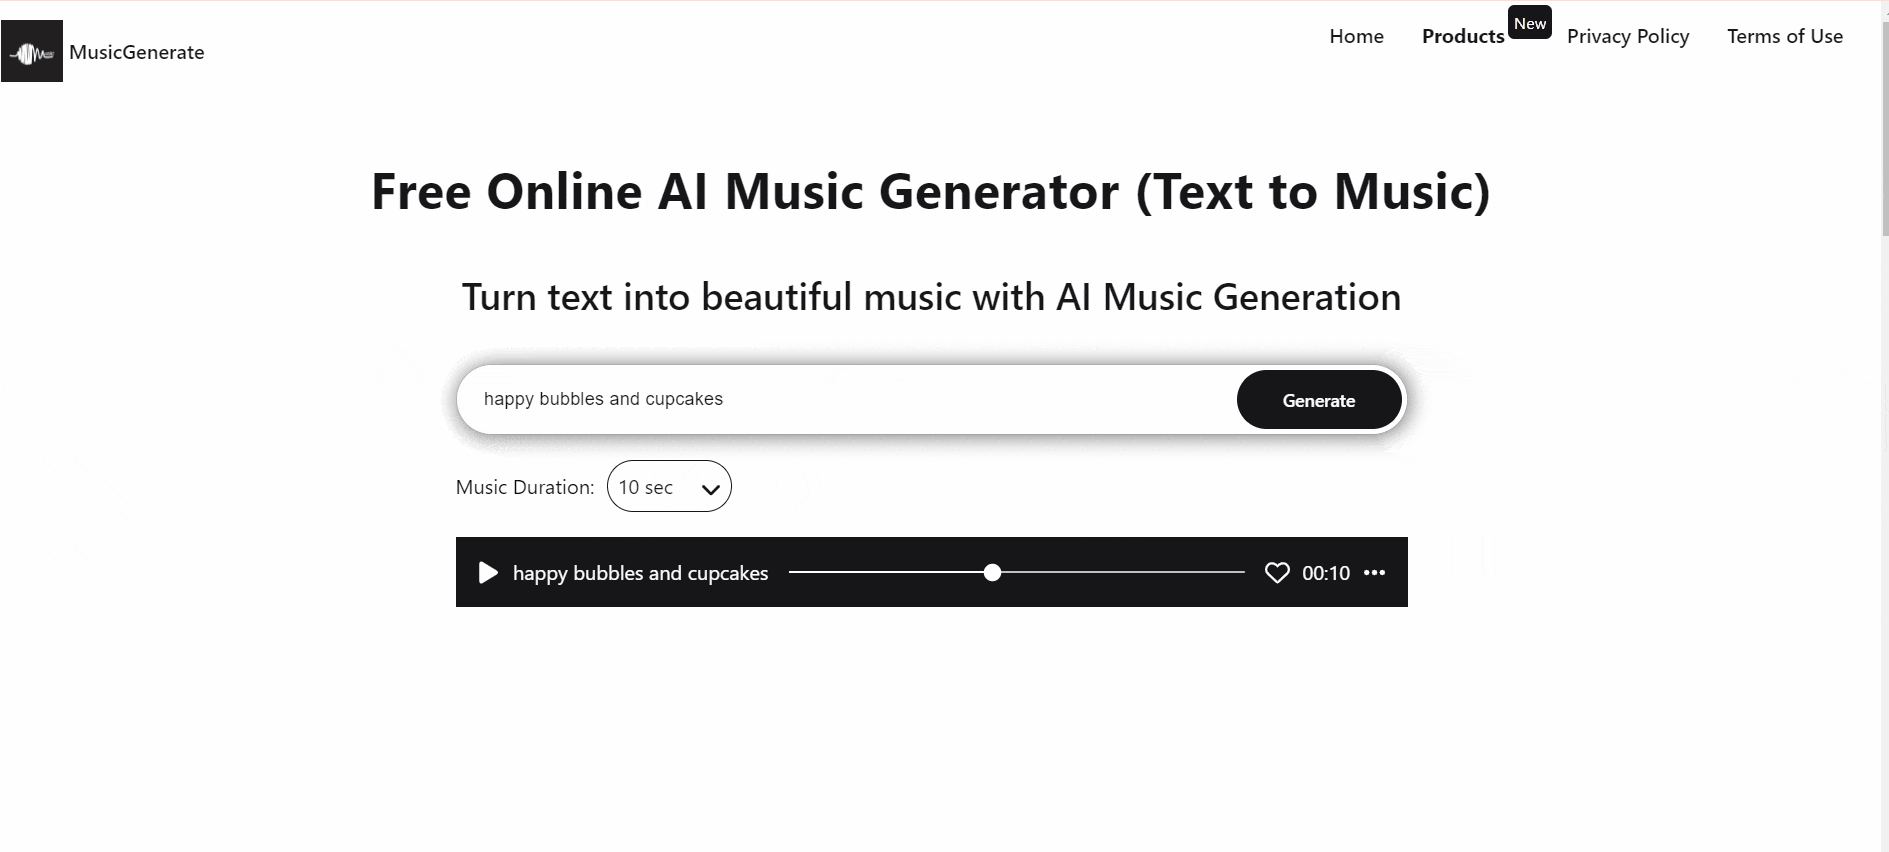 Music Generate - a free online text-to-music AI tool. GIF showing the download process.